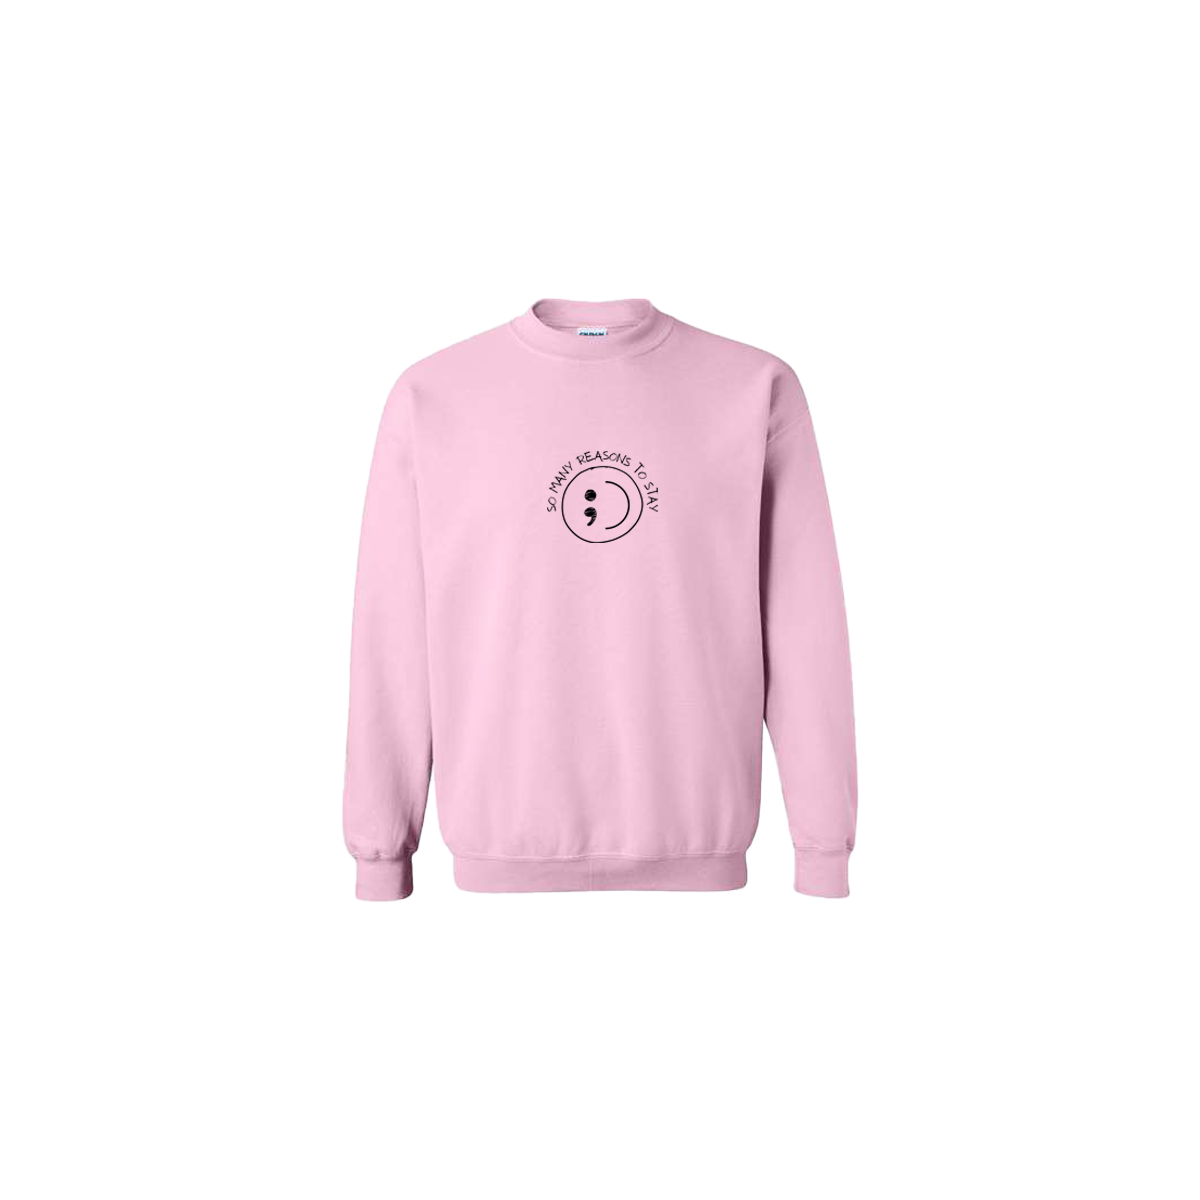 So Many Reasons to Stay Embroidered Light Pink Crewneck - Mental Health Awareness Clothing